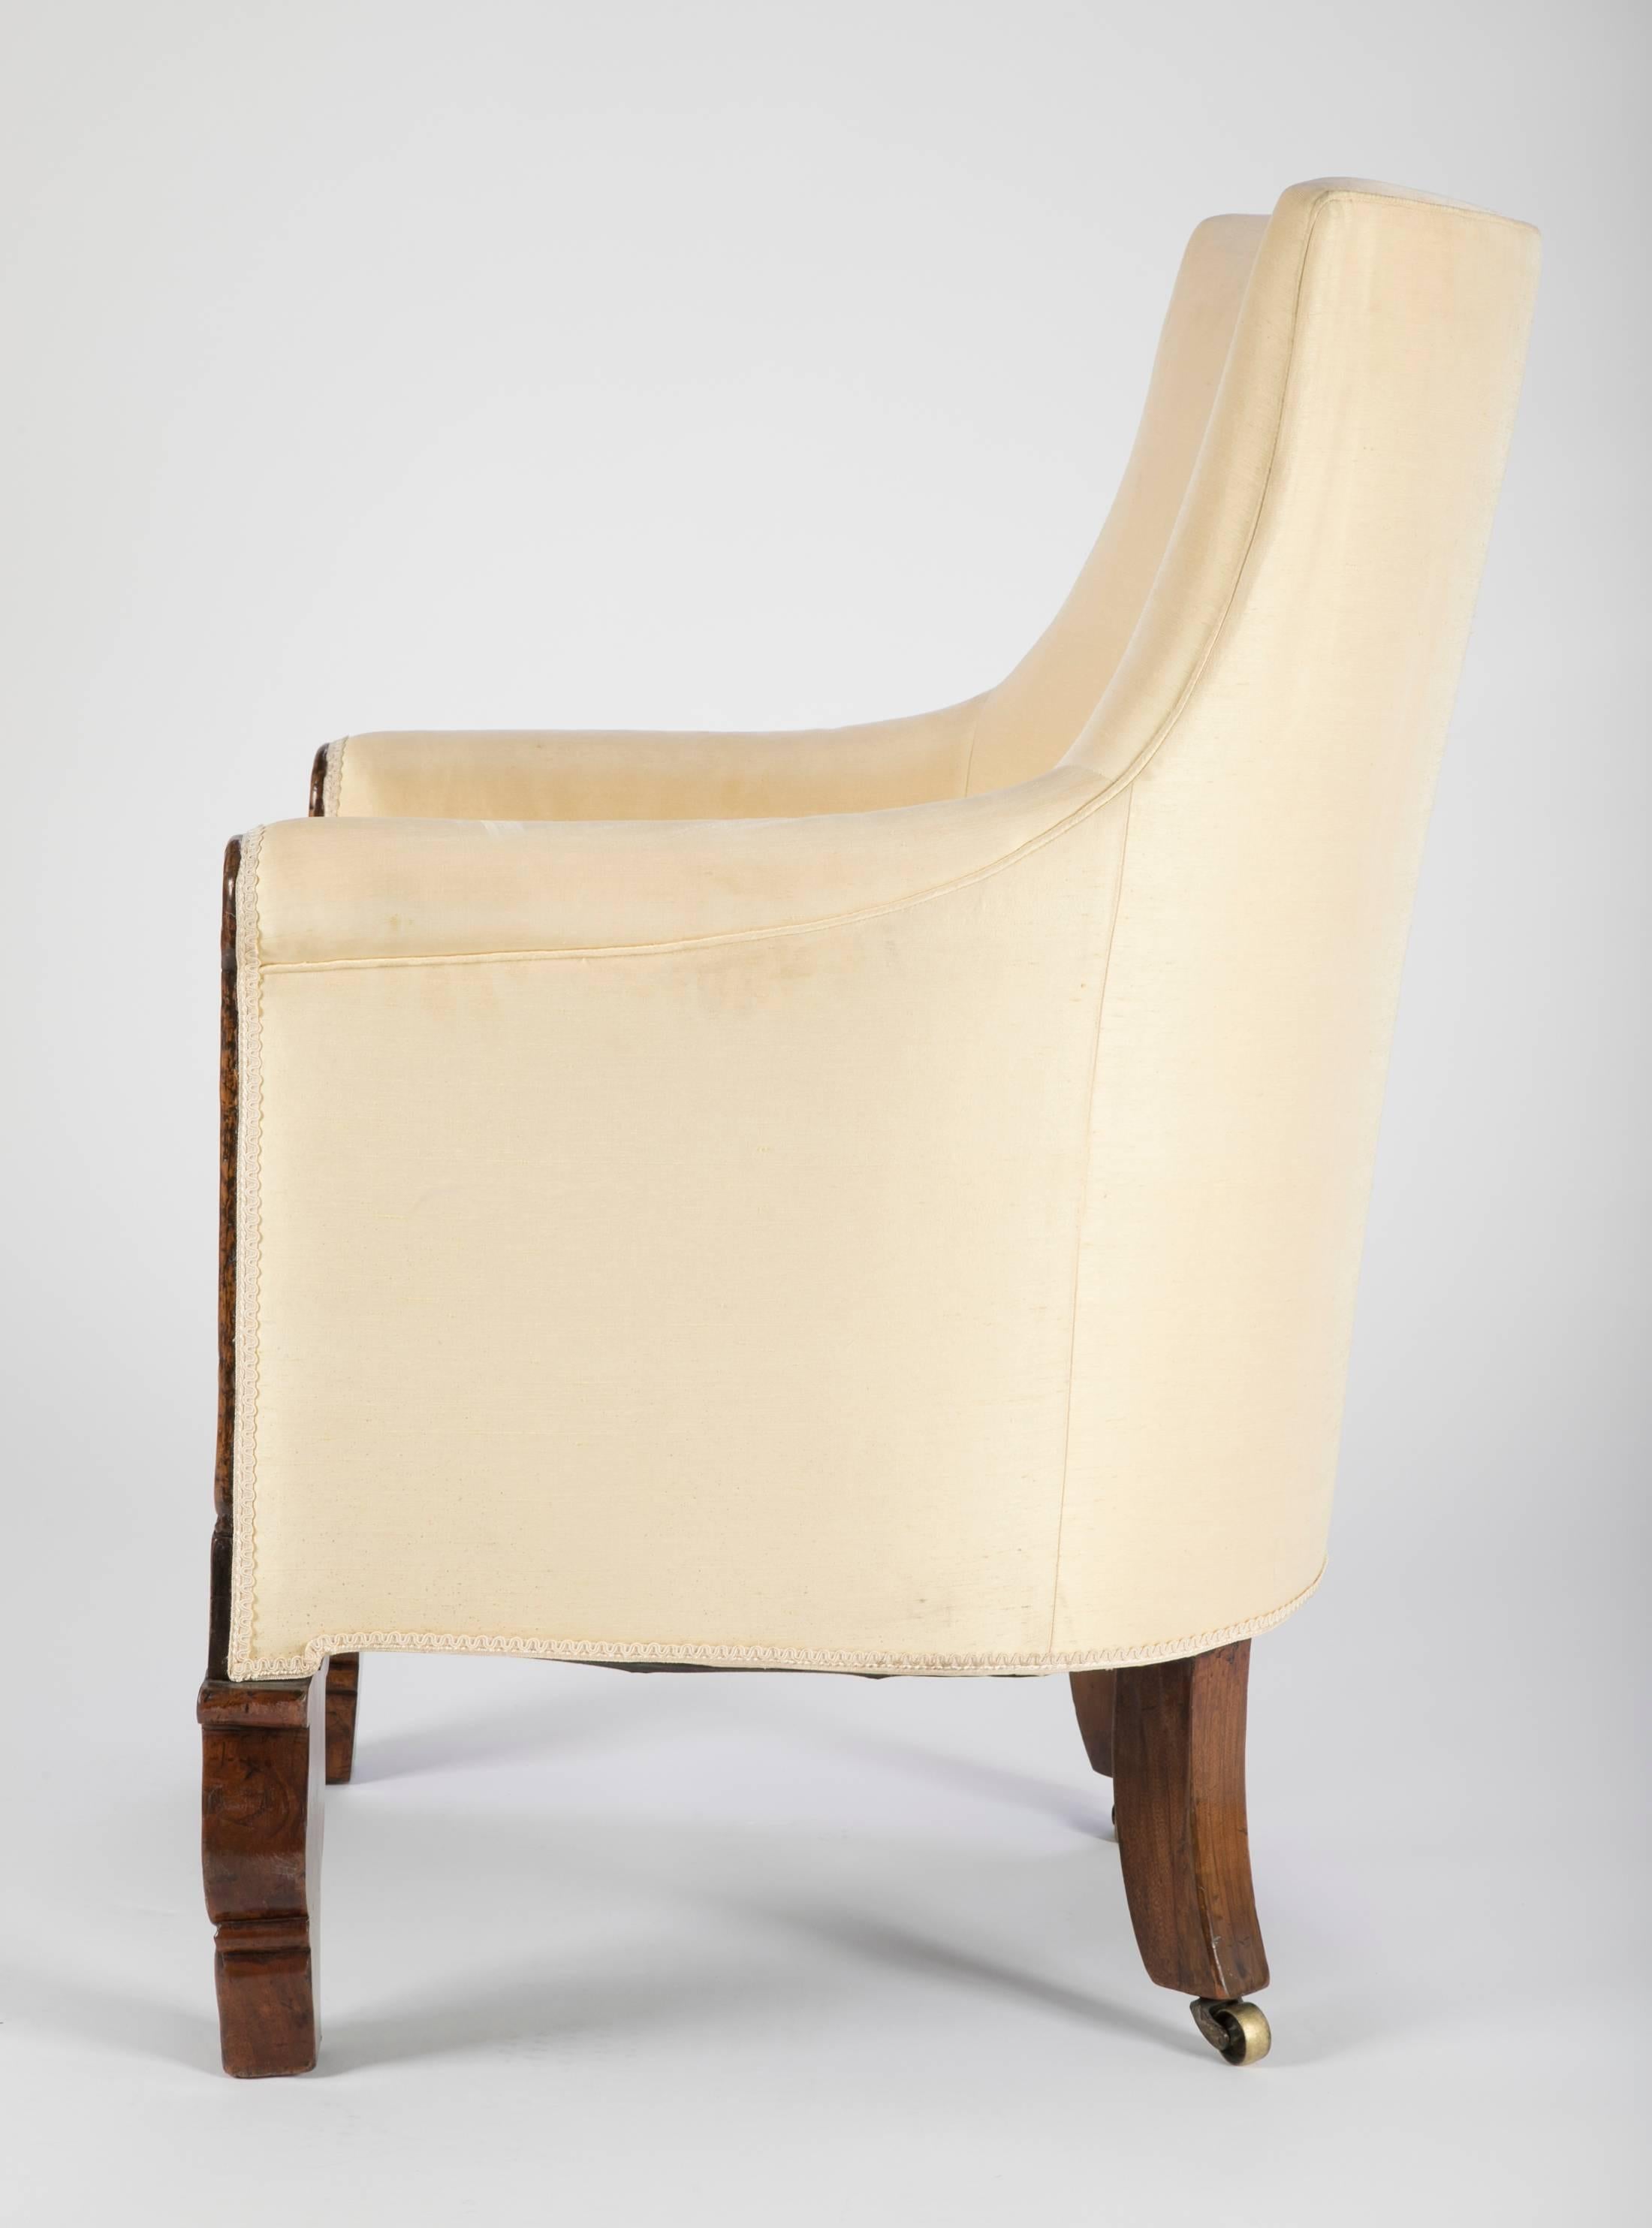 Irish Regency Carved Walnut Armchair In Good Condition For Sale In Stamford, CT